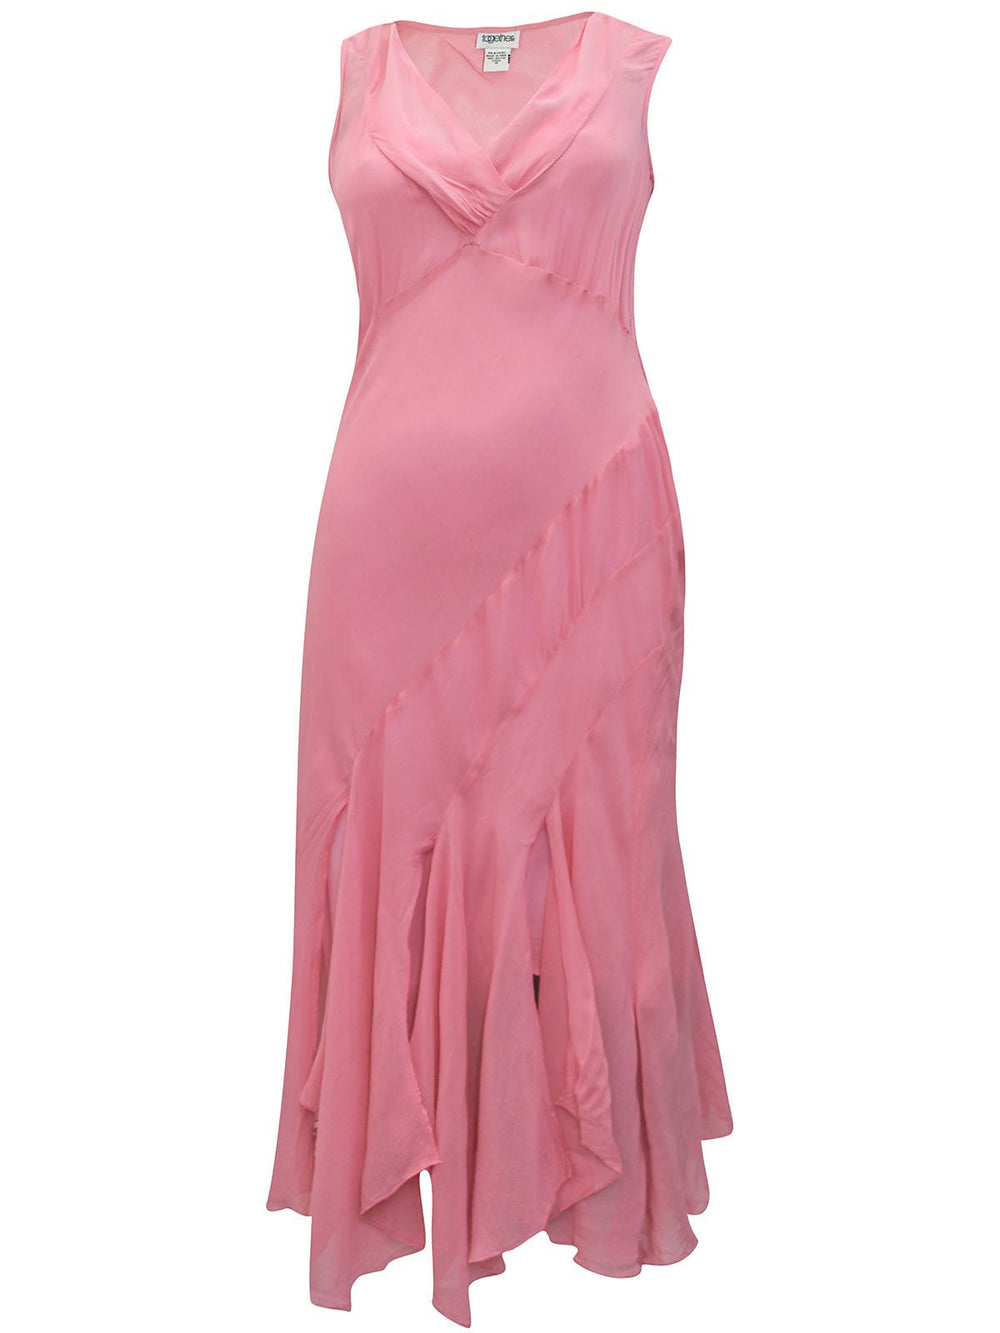 Together Pink Plus Size Sleeveless Asymmetric Ruffle Dress - Curvy Chic Boutique